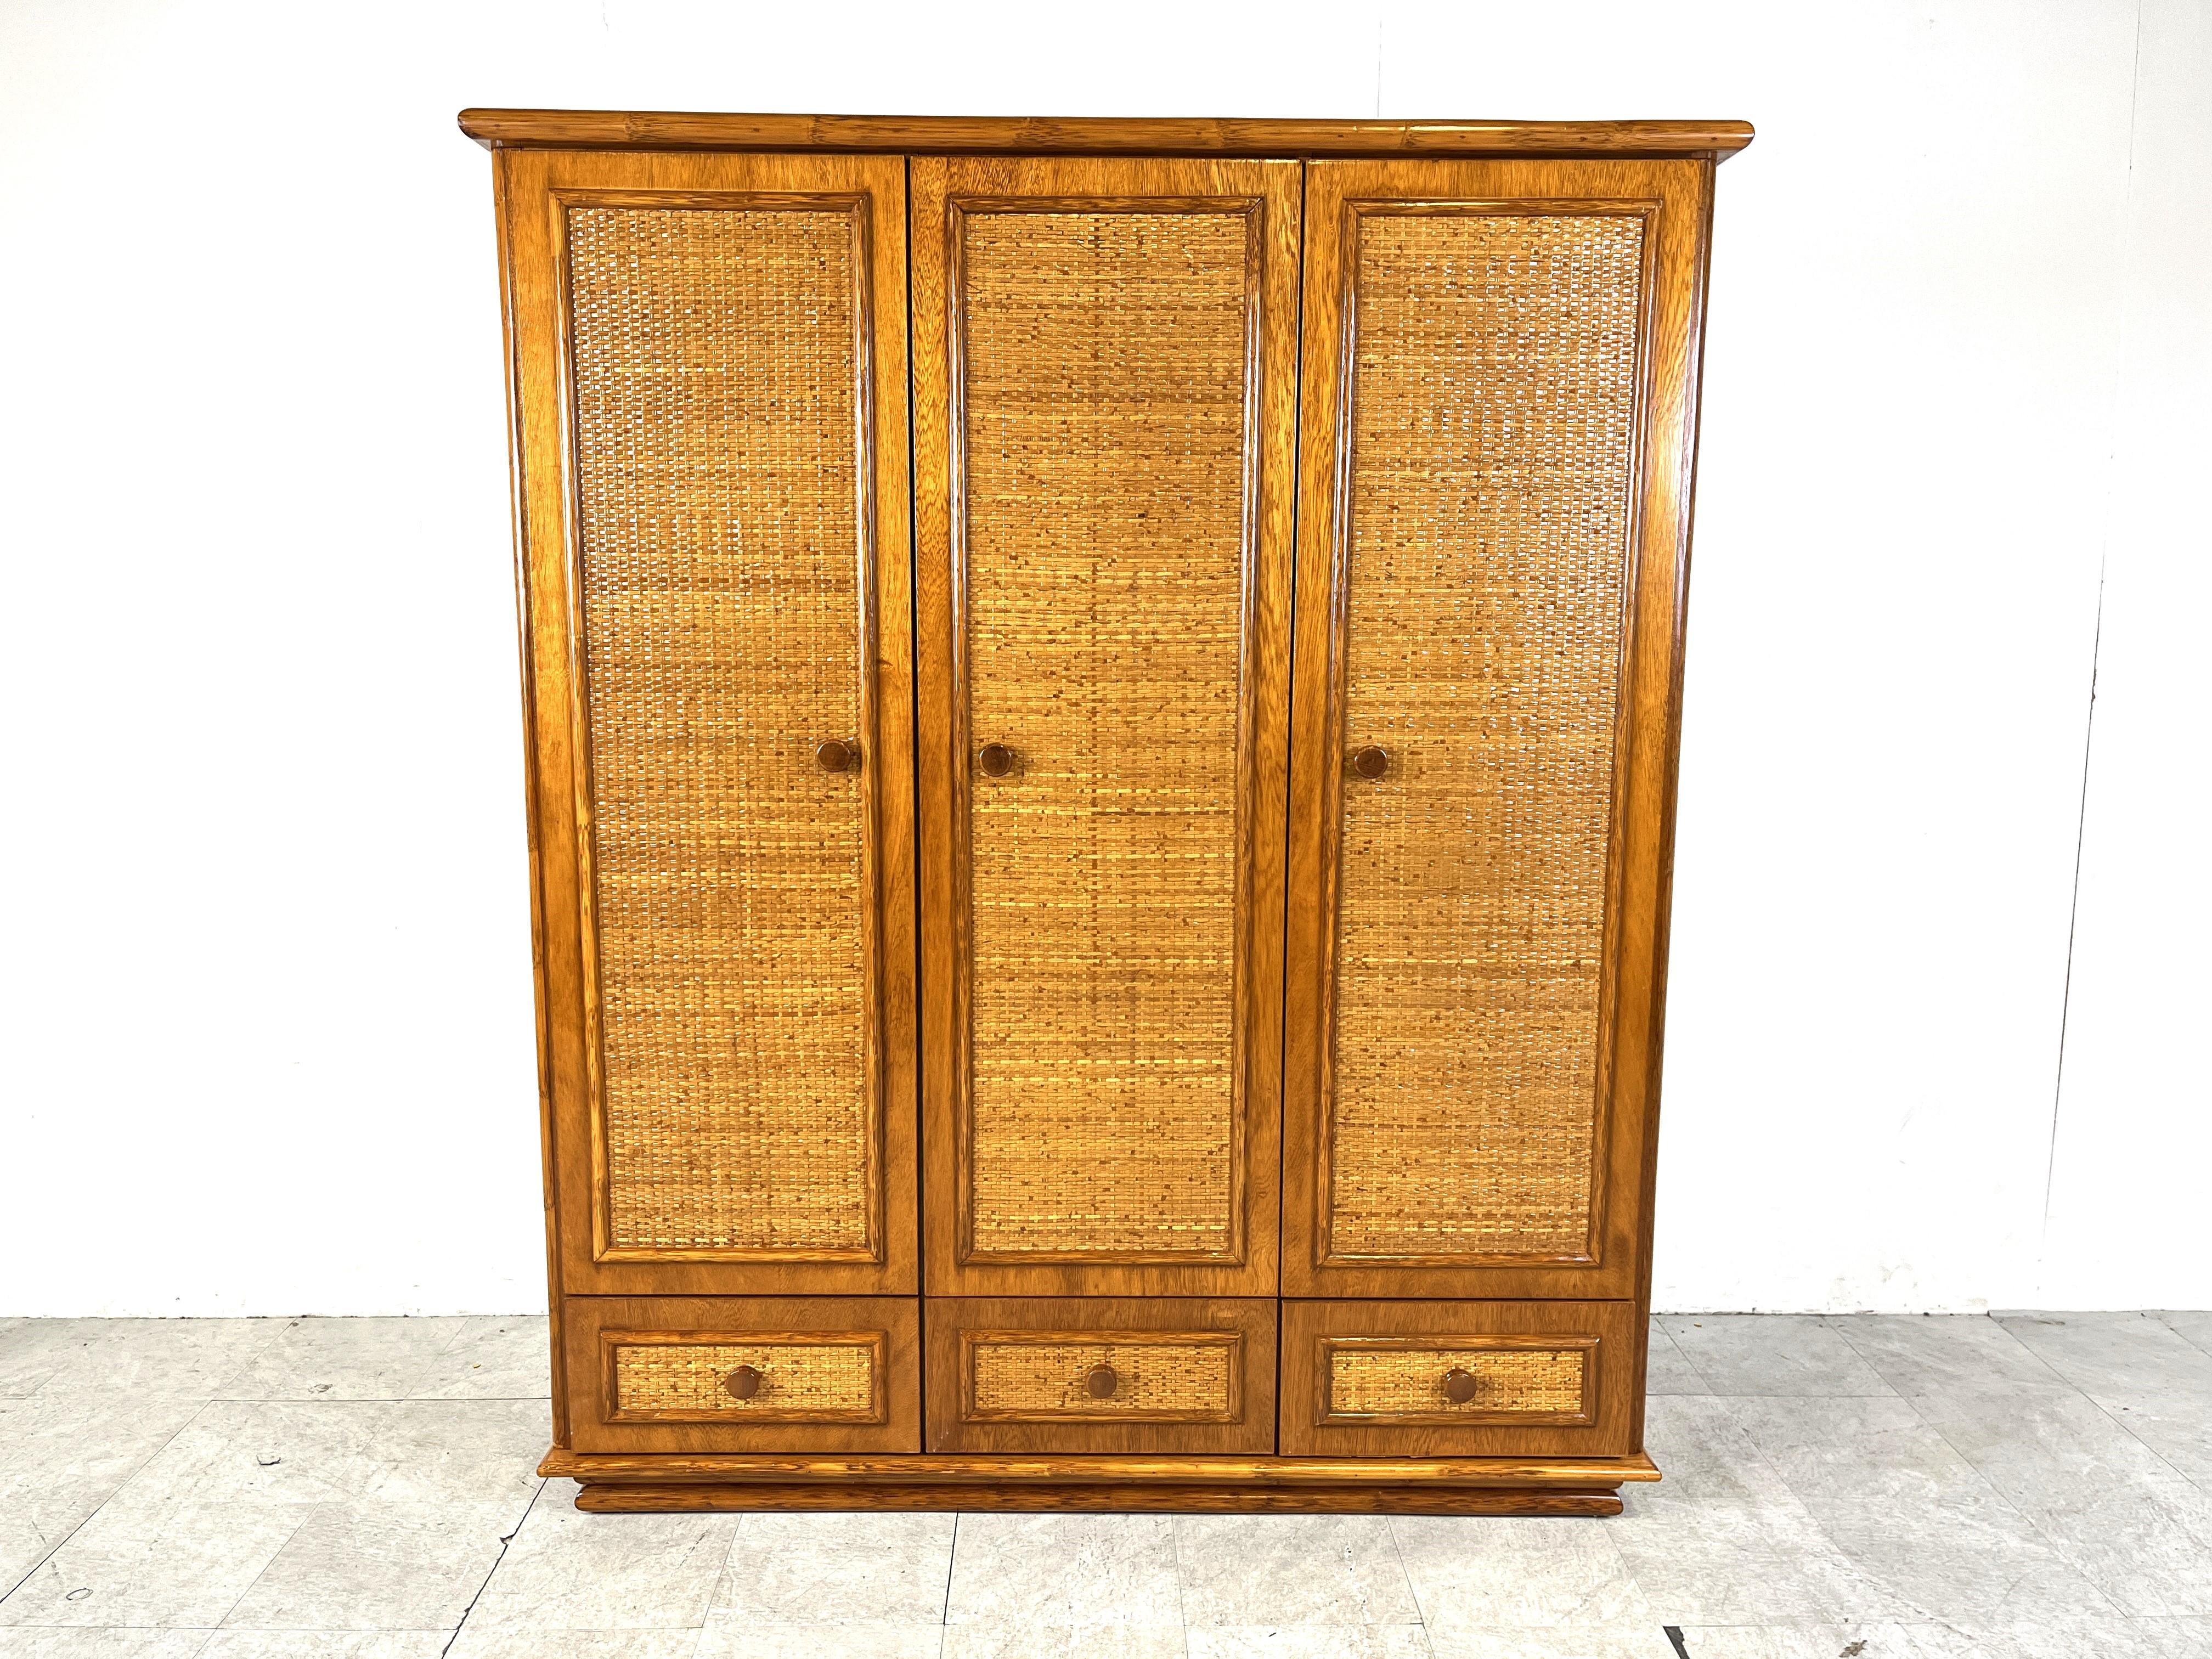 Vintage wardrobe by Maugrion and was sold back in the days in the high end furniture stores from Roche Bobois.

The wardrobe has 3 doors and  3 drawers and is made of wood, rattan and bamboo.

Very well made wardrobe which offers plenty of storage